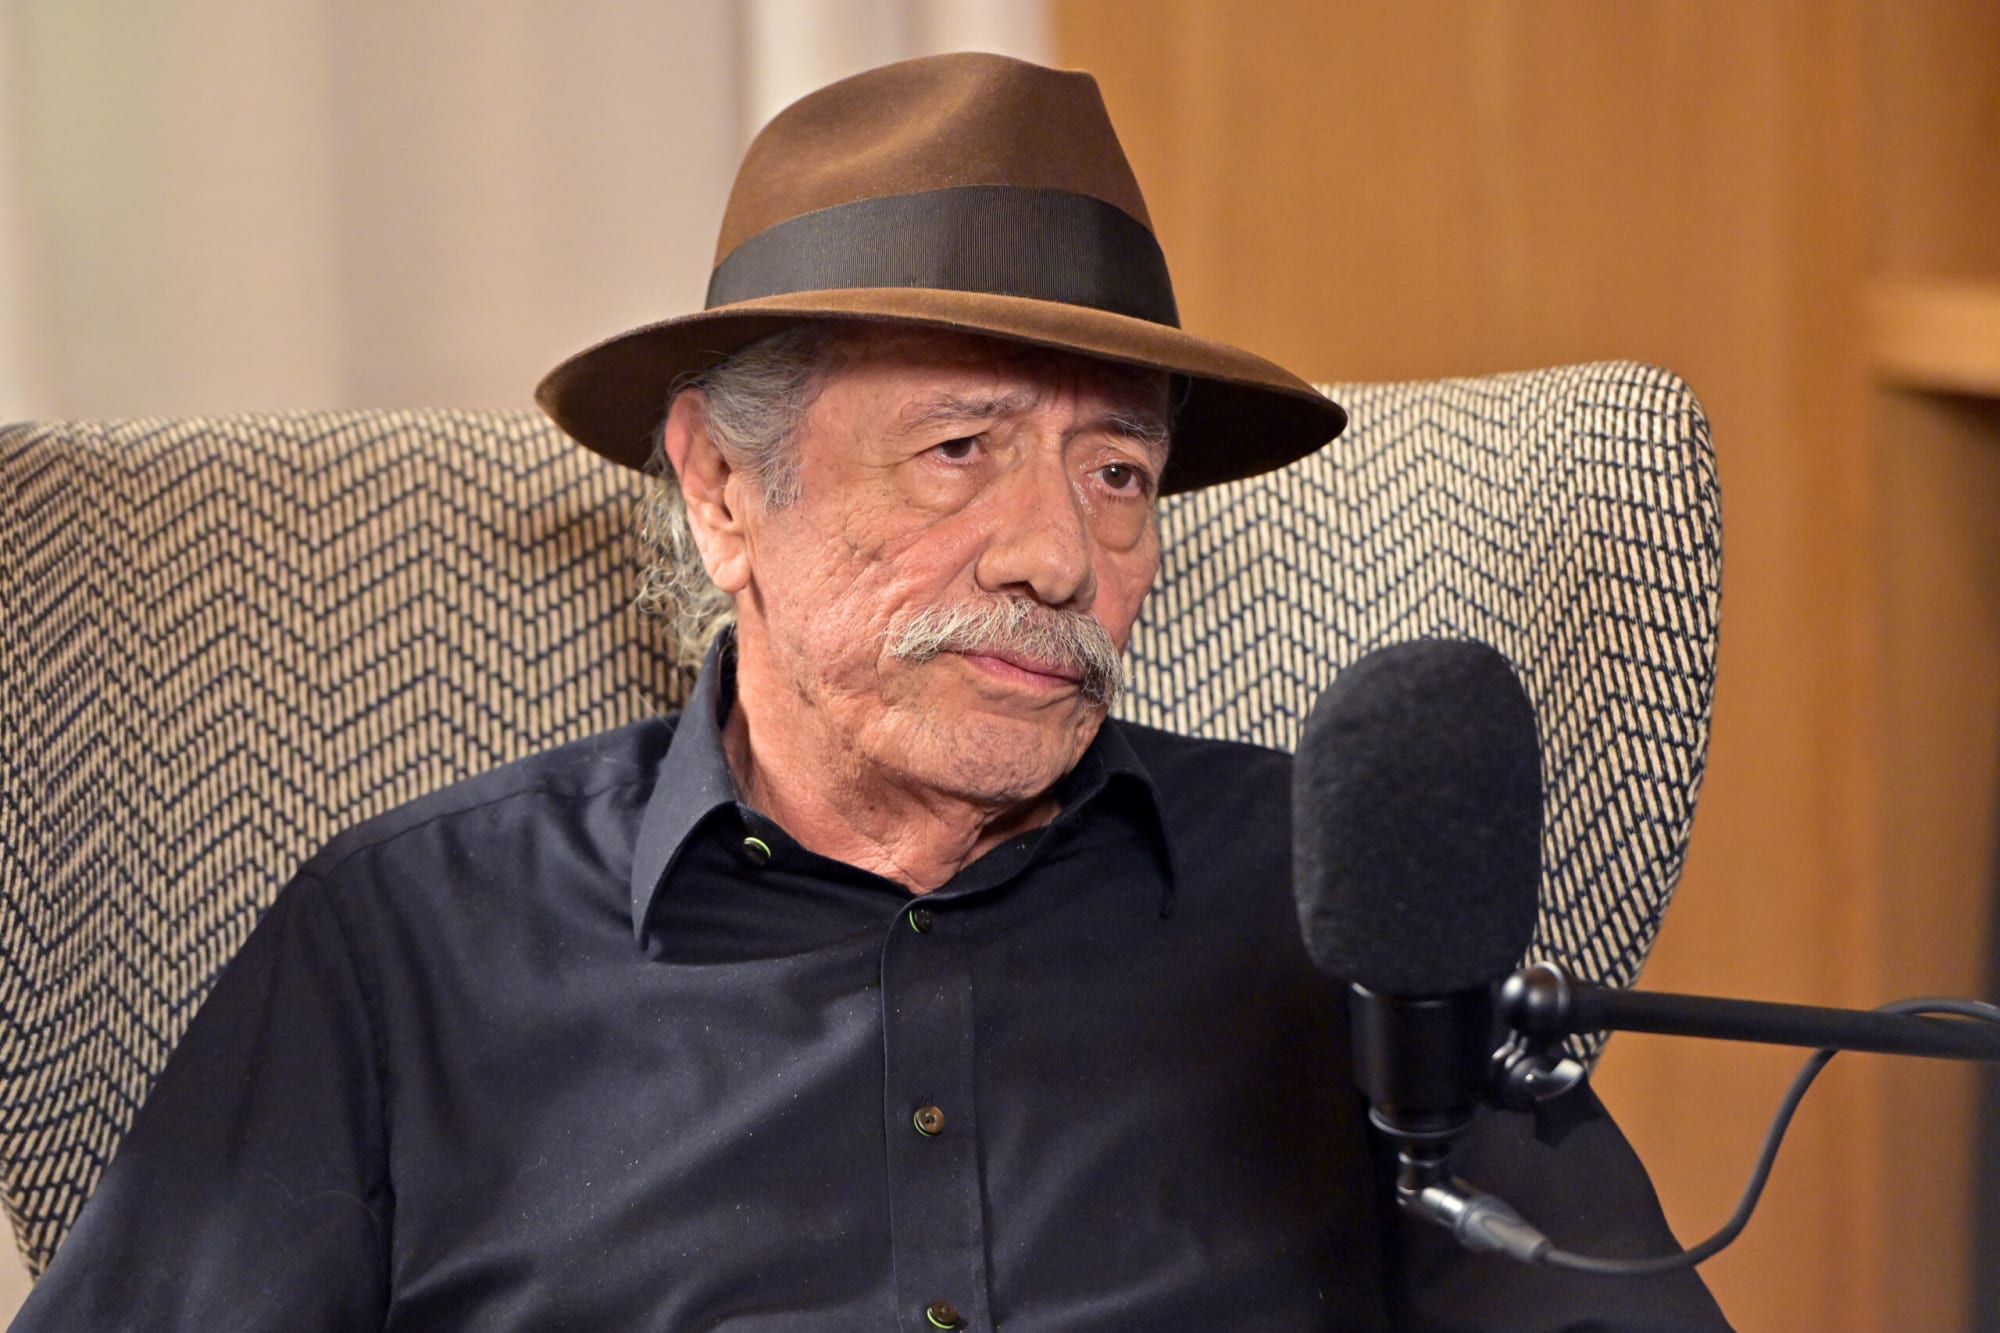 Edward James Olmos reveals battle with throat cancer